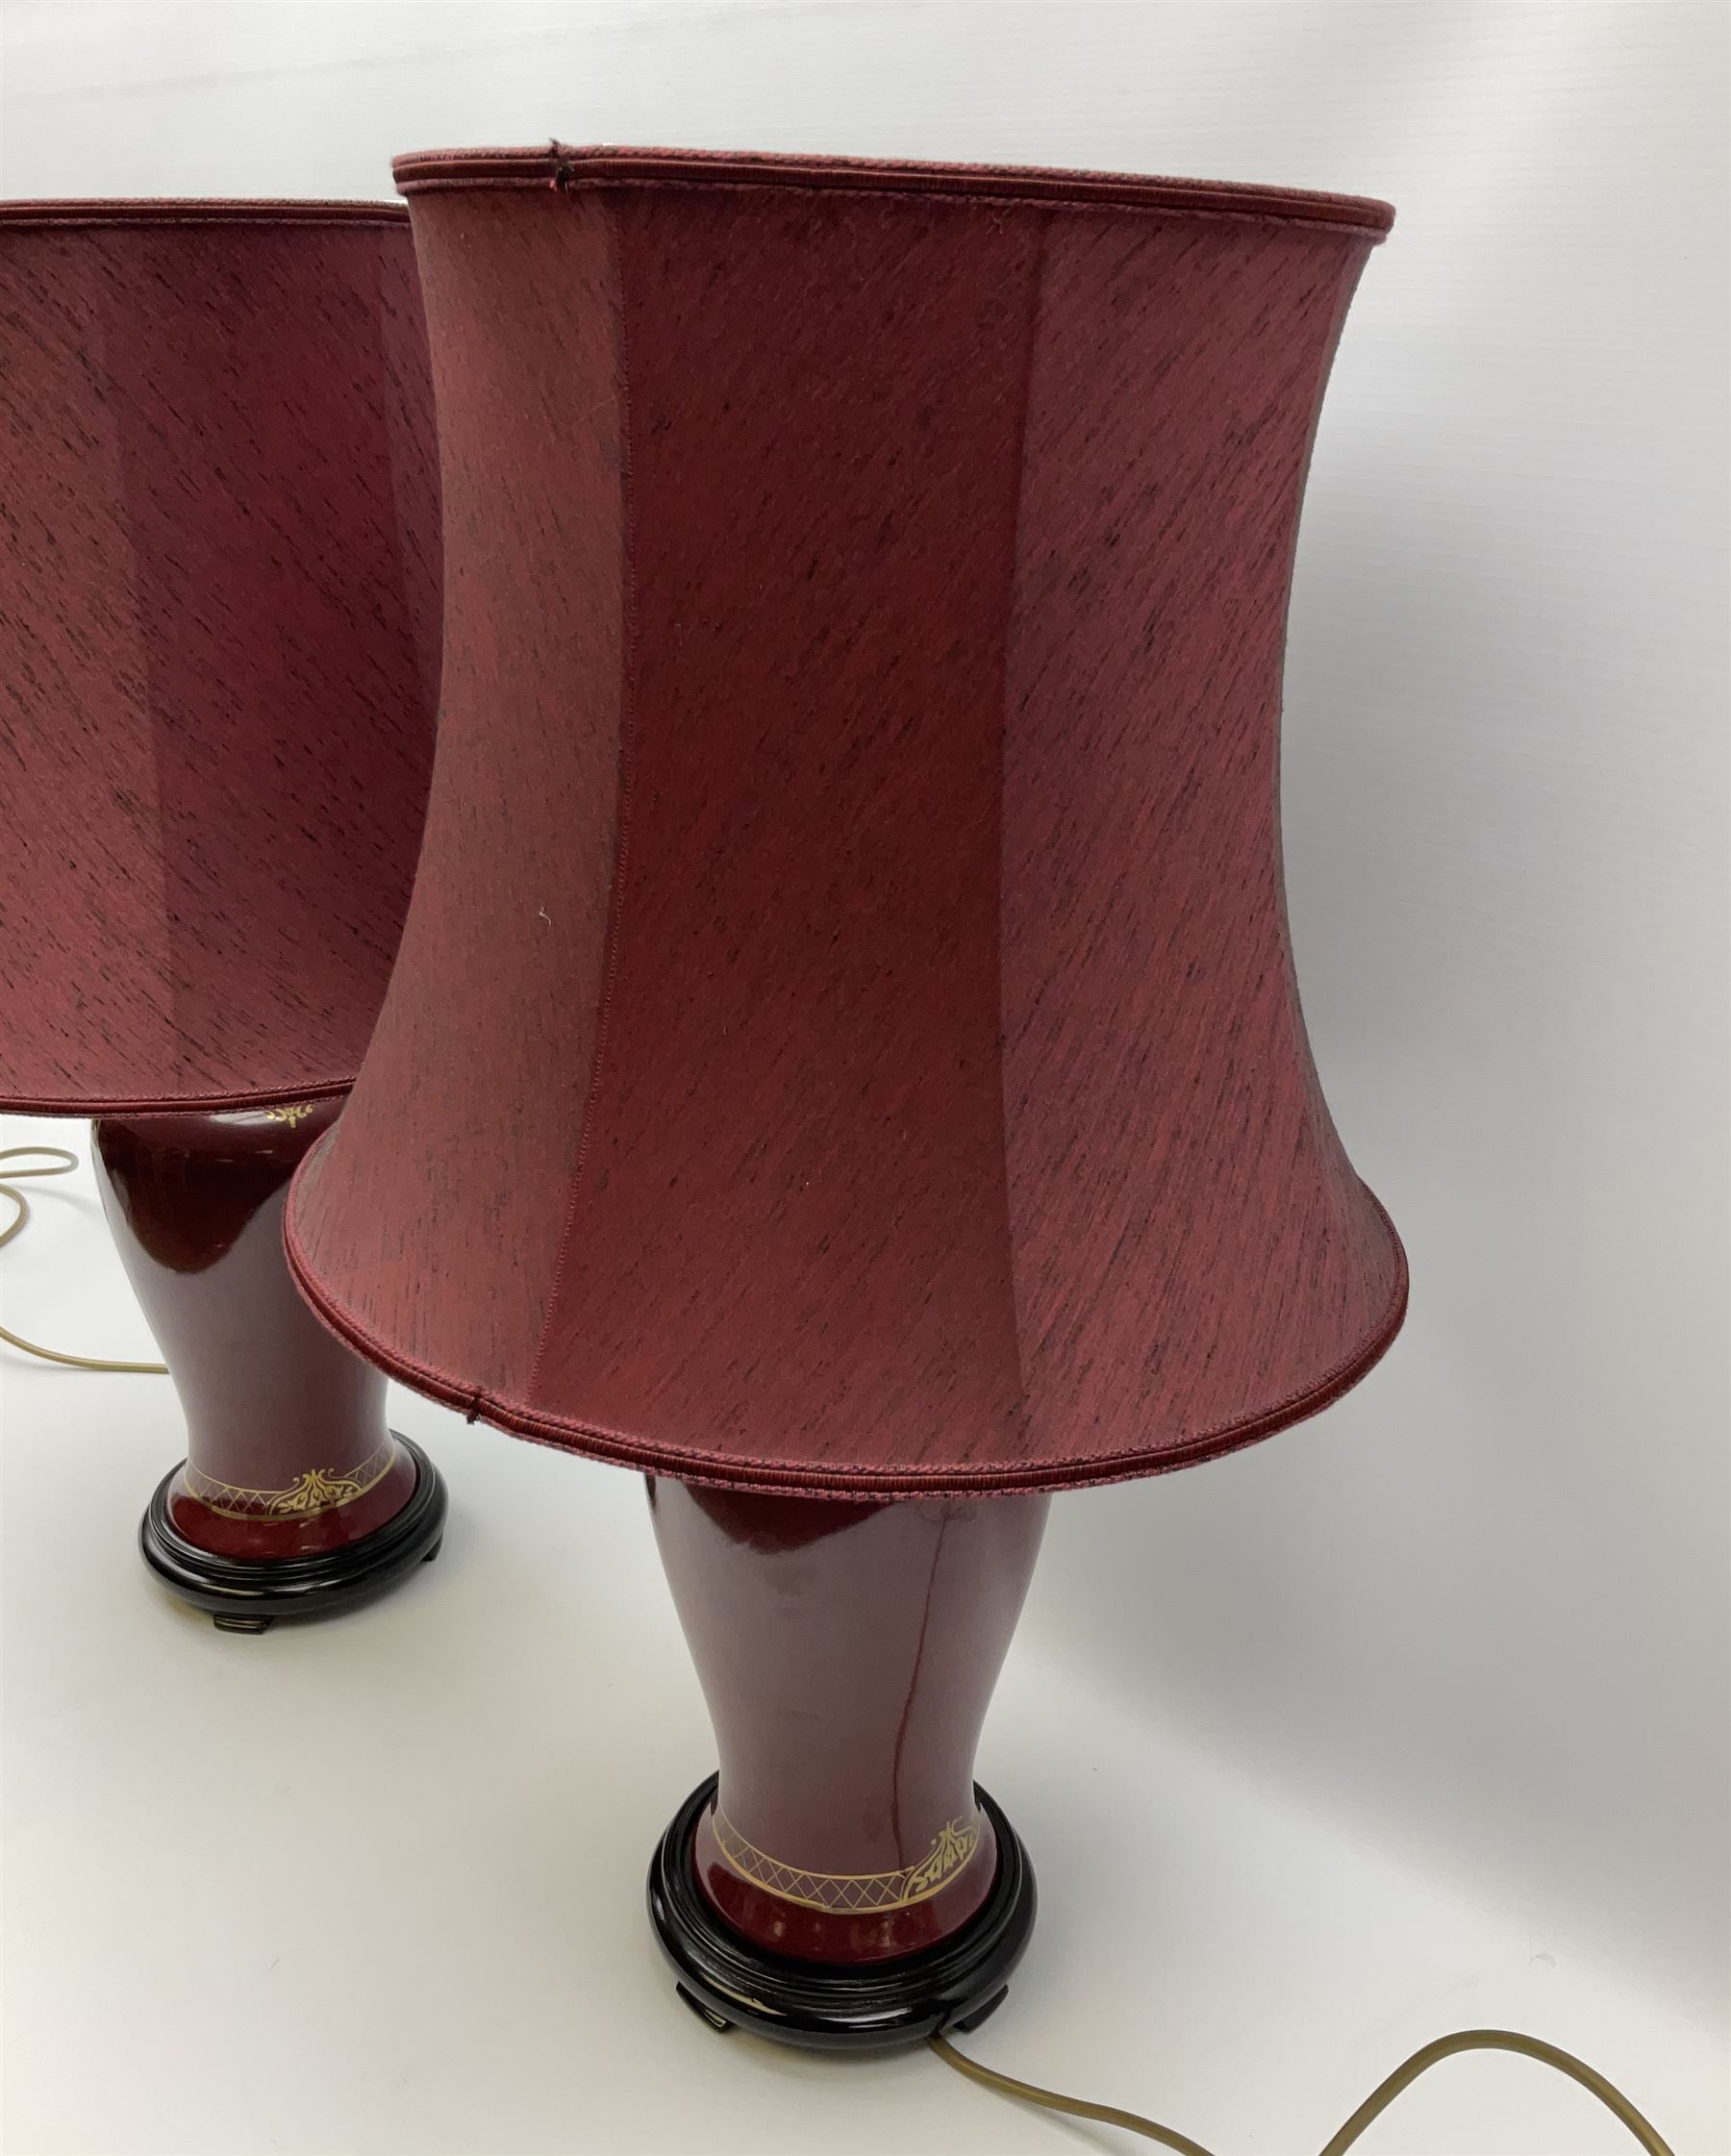 Pair of dark red table lamps in baluster form with a round wooden base - Image 2 of 6